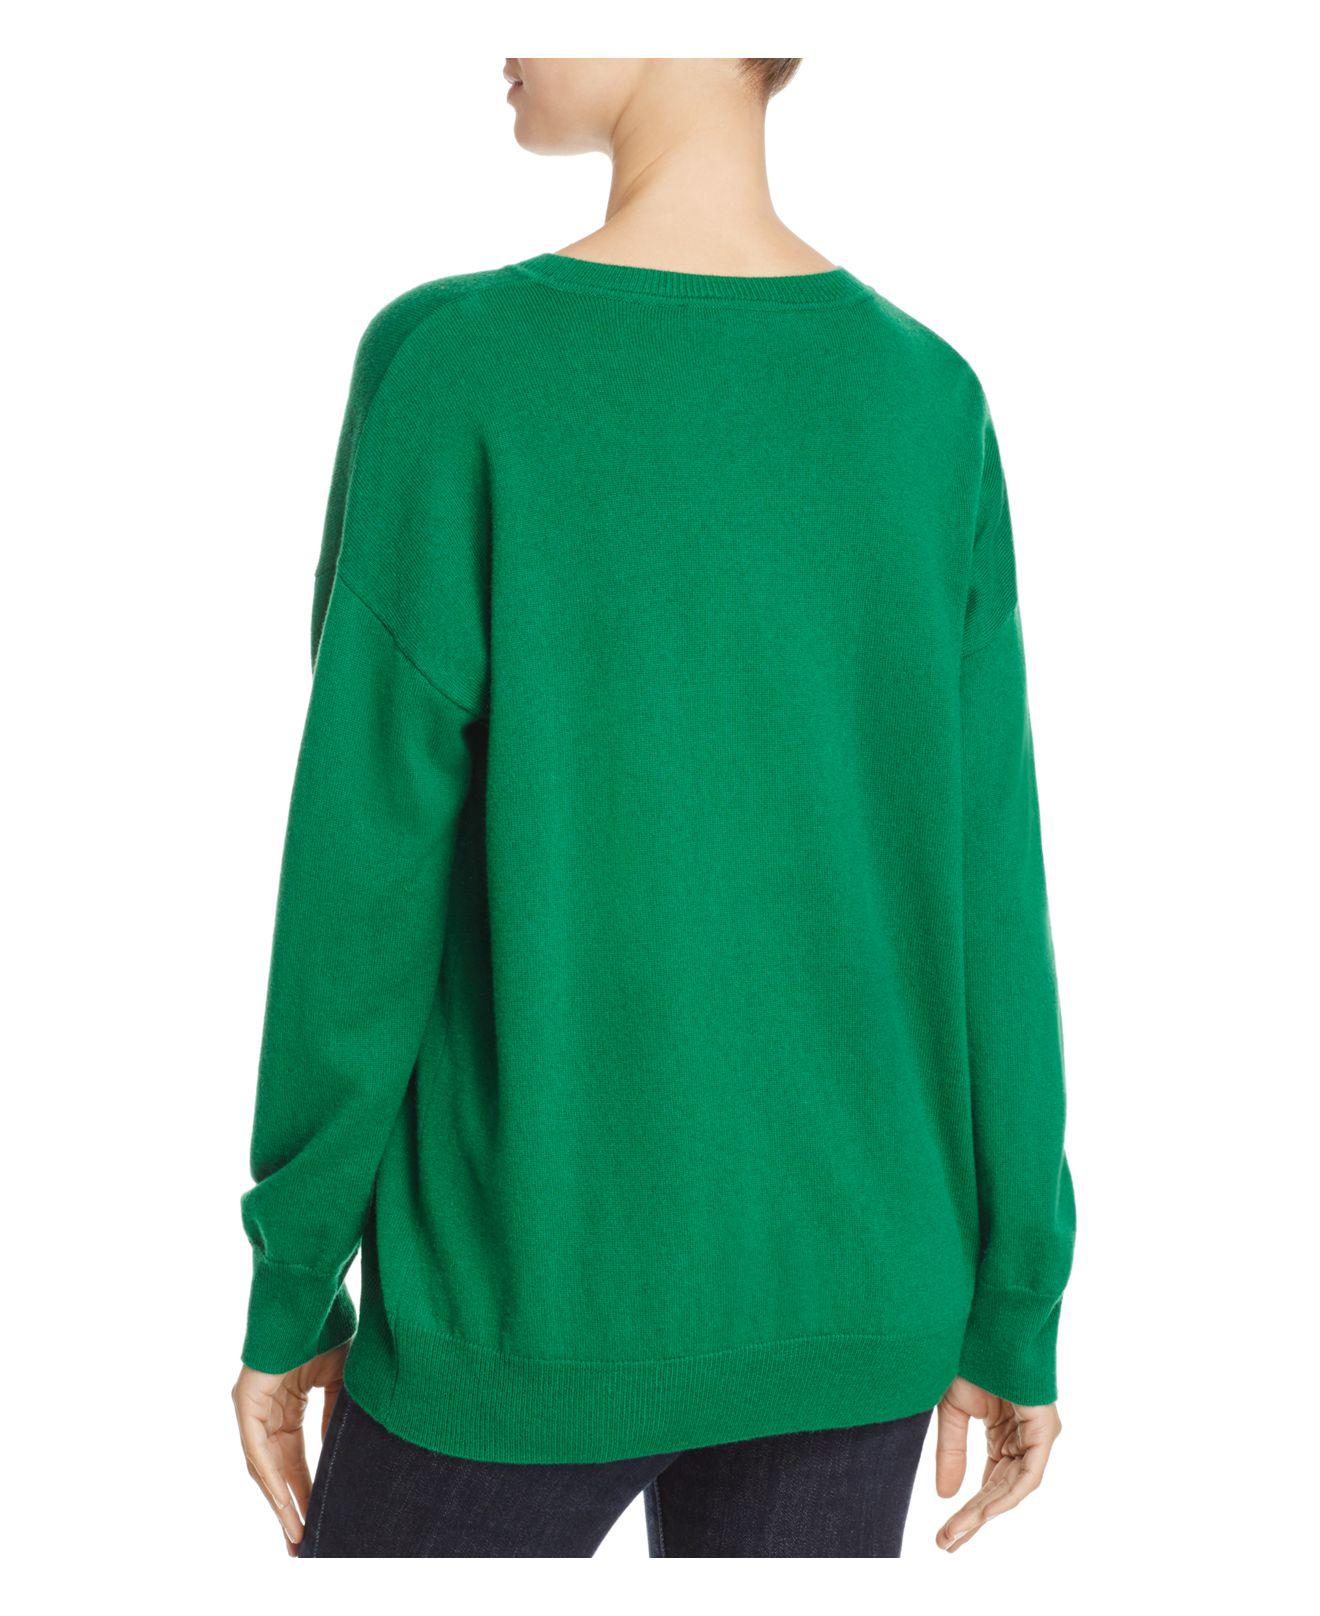 Sandro Generation Wool & Cashmere Sweater in Moss Green (Green) - Lyst